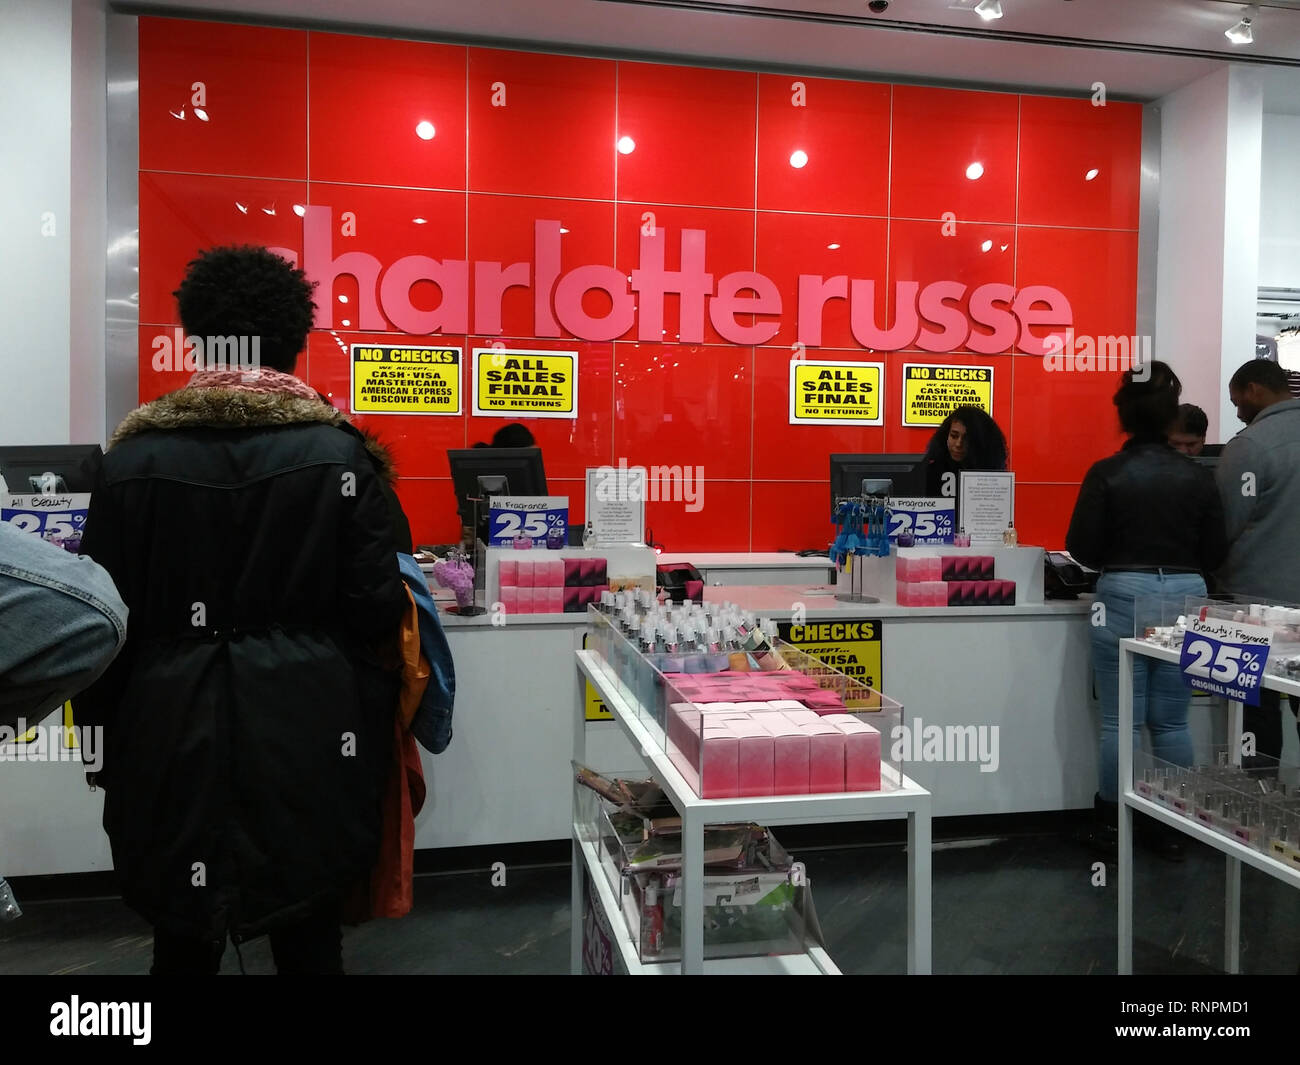 The Charlotte Russe store in Herald Square in New York on Friday, February 15, 2019 displays signs informing shoppers of the discounted merchandise lying within. The chain, which appeals to a younger demographic, filed for chapter 11 bankruptcy protection and is shuttering approximately 94 stores. (Â© Richard B. Levine) Stock Photo